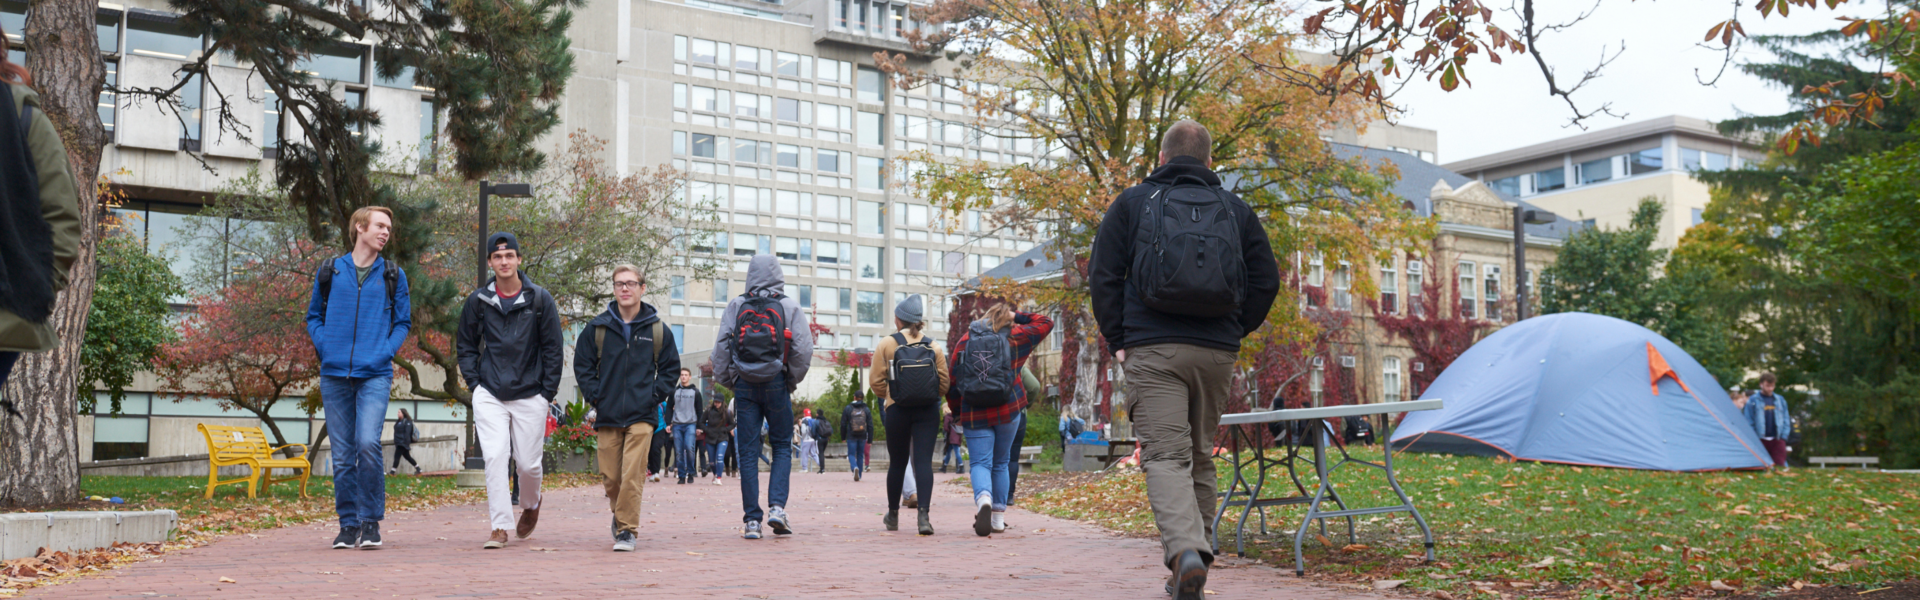 Students walk through Branion Plaza in the fall.